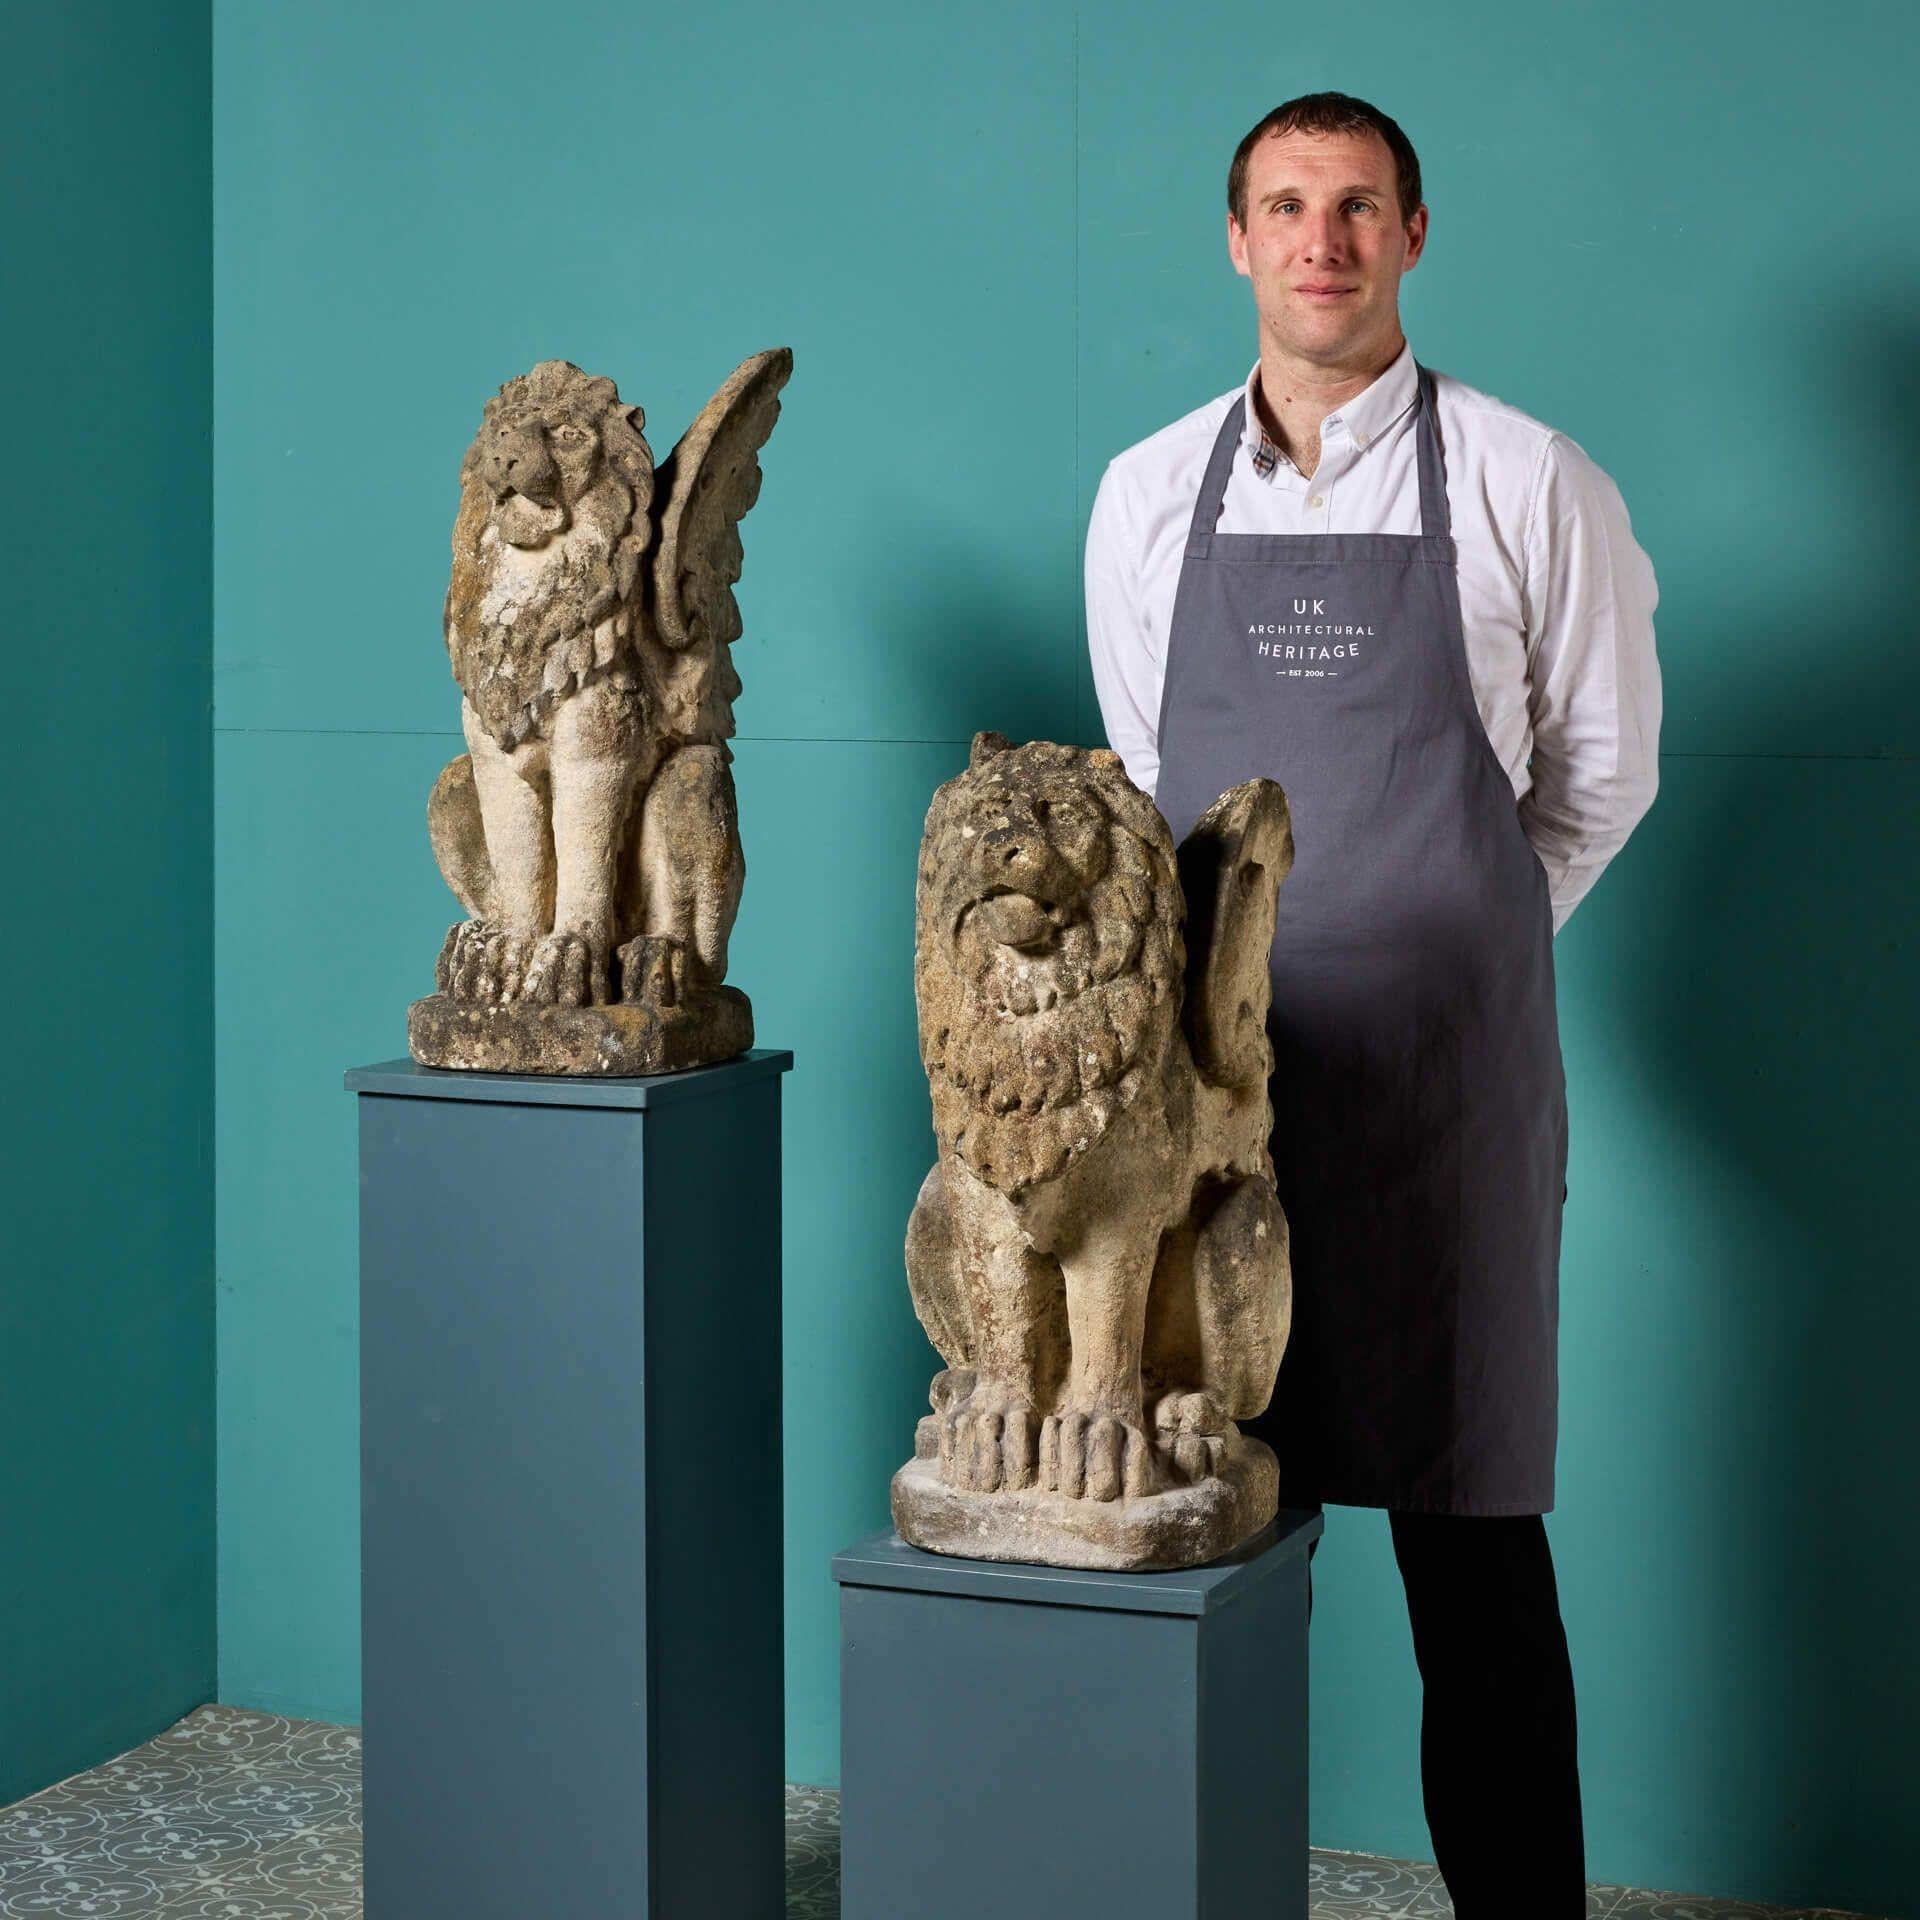 Dating from the mid 19th century, this original pair of natural limestone winged lion statues are a rare find.
Having stood the test of time for more than 170 years, each lion is beautifully weathered yet retains its core features, telling the story